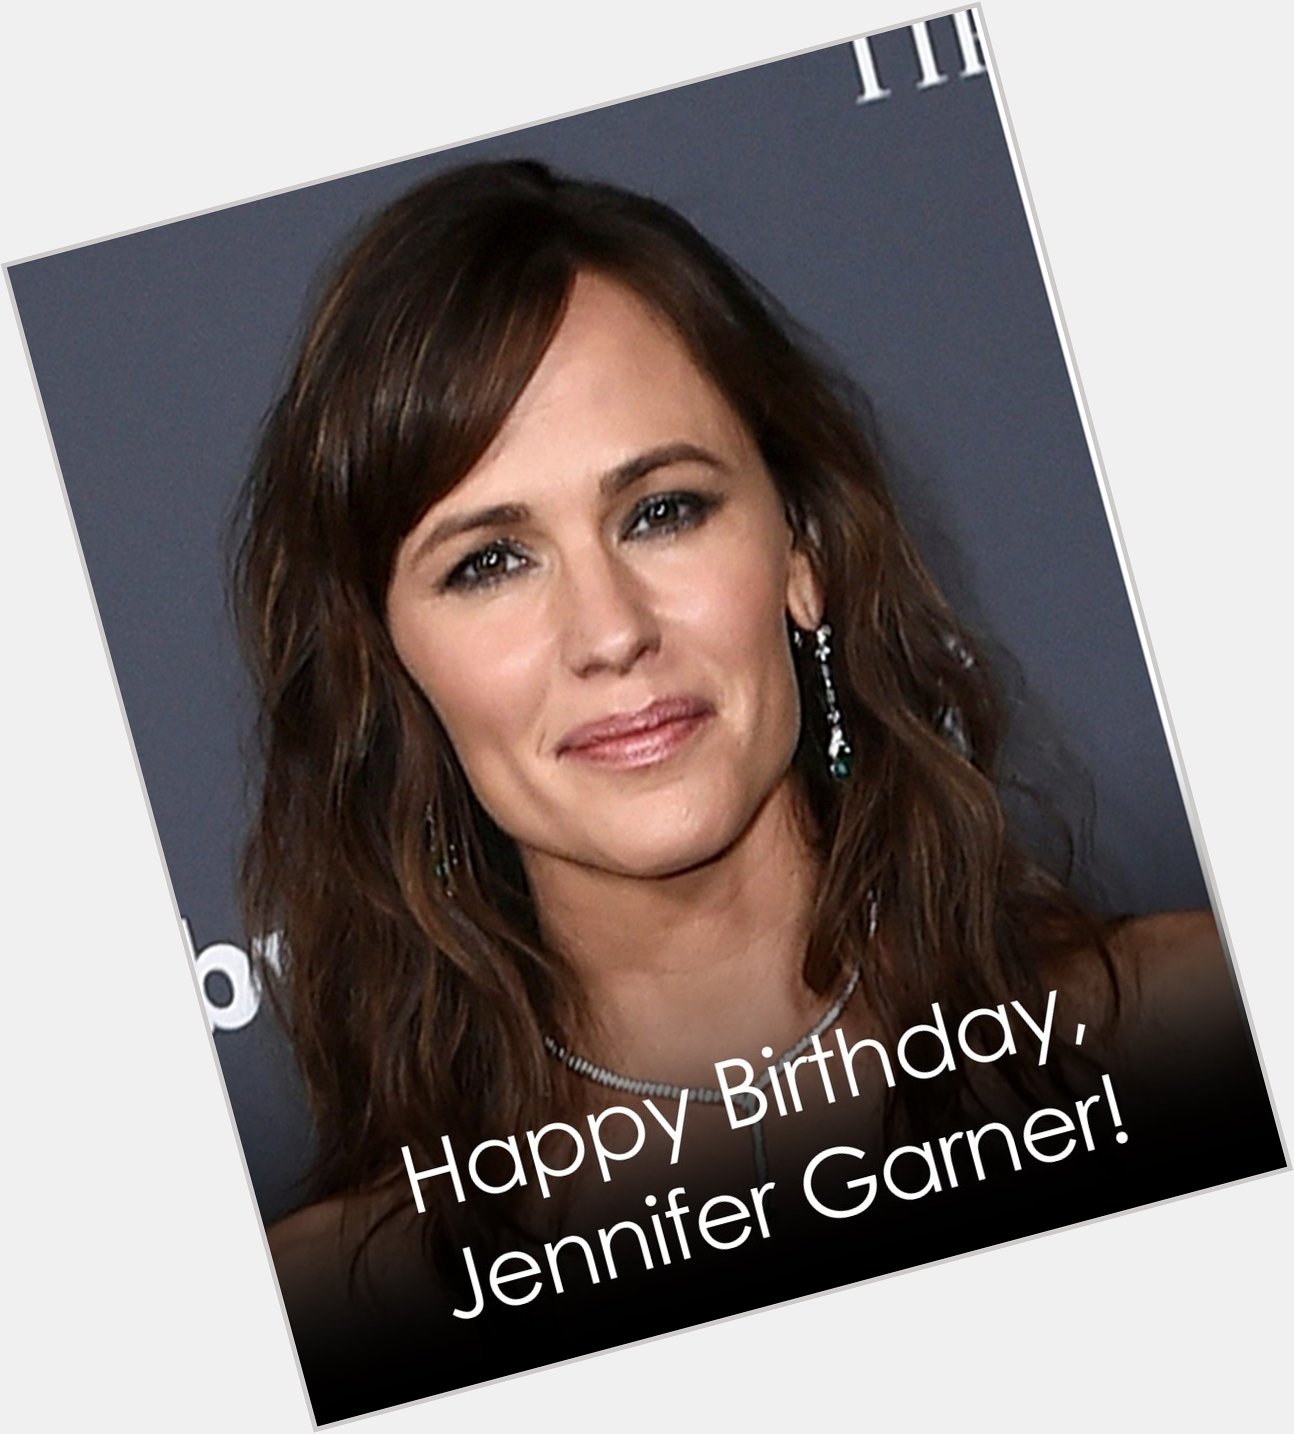 Happy birthday Jennifer Garner!   The actress is going on 50 today.  